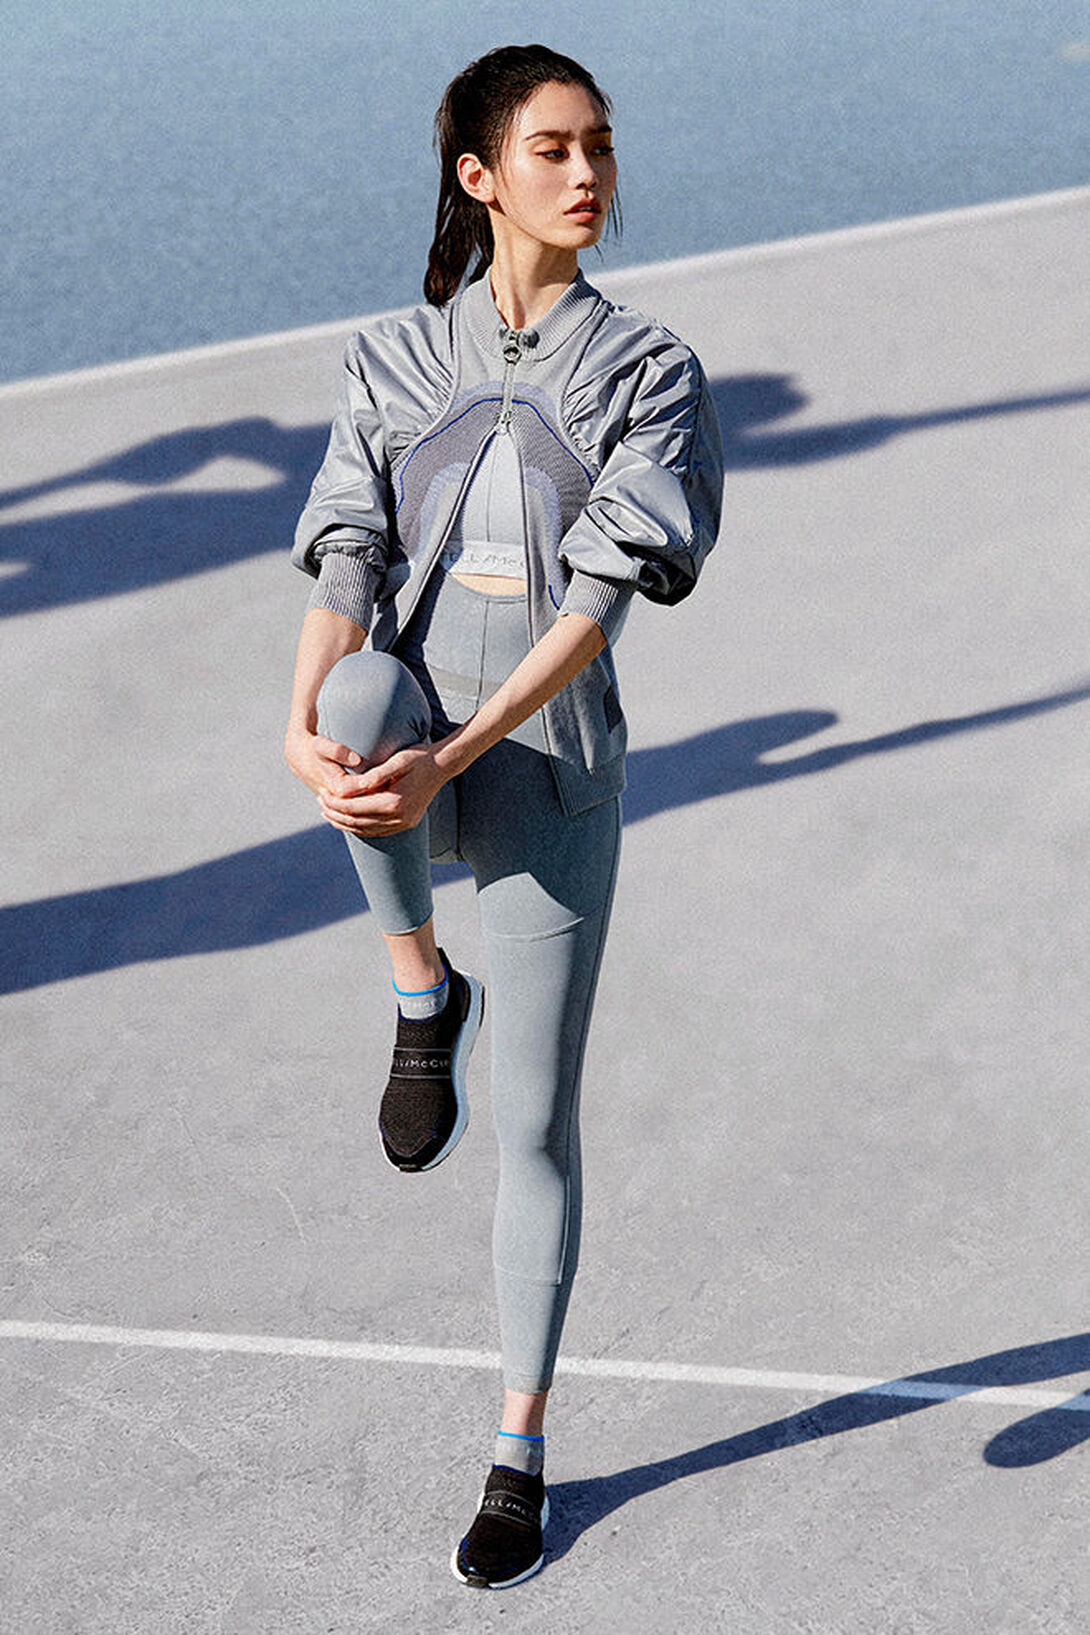 Adidas adds Stella McCartney tracksuit to its circularity collection